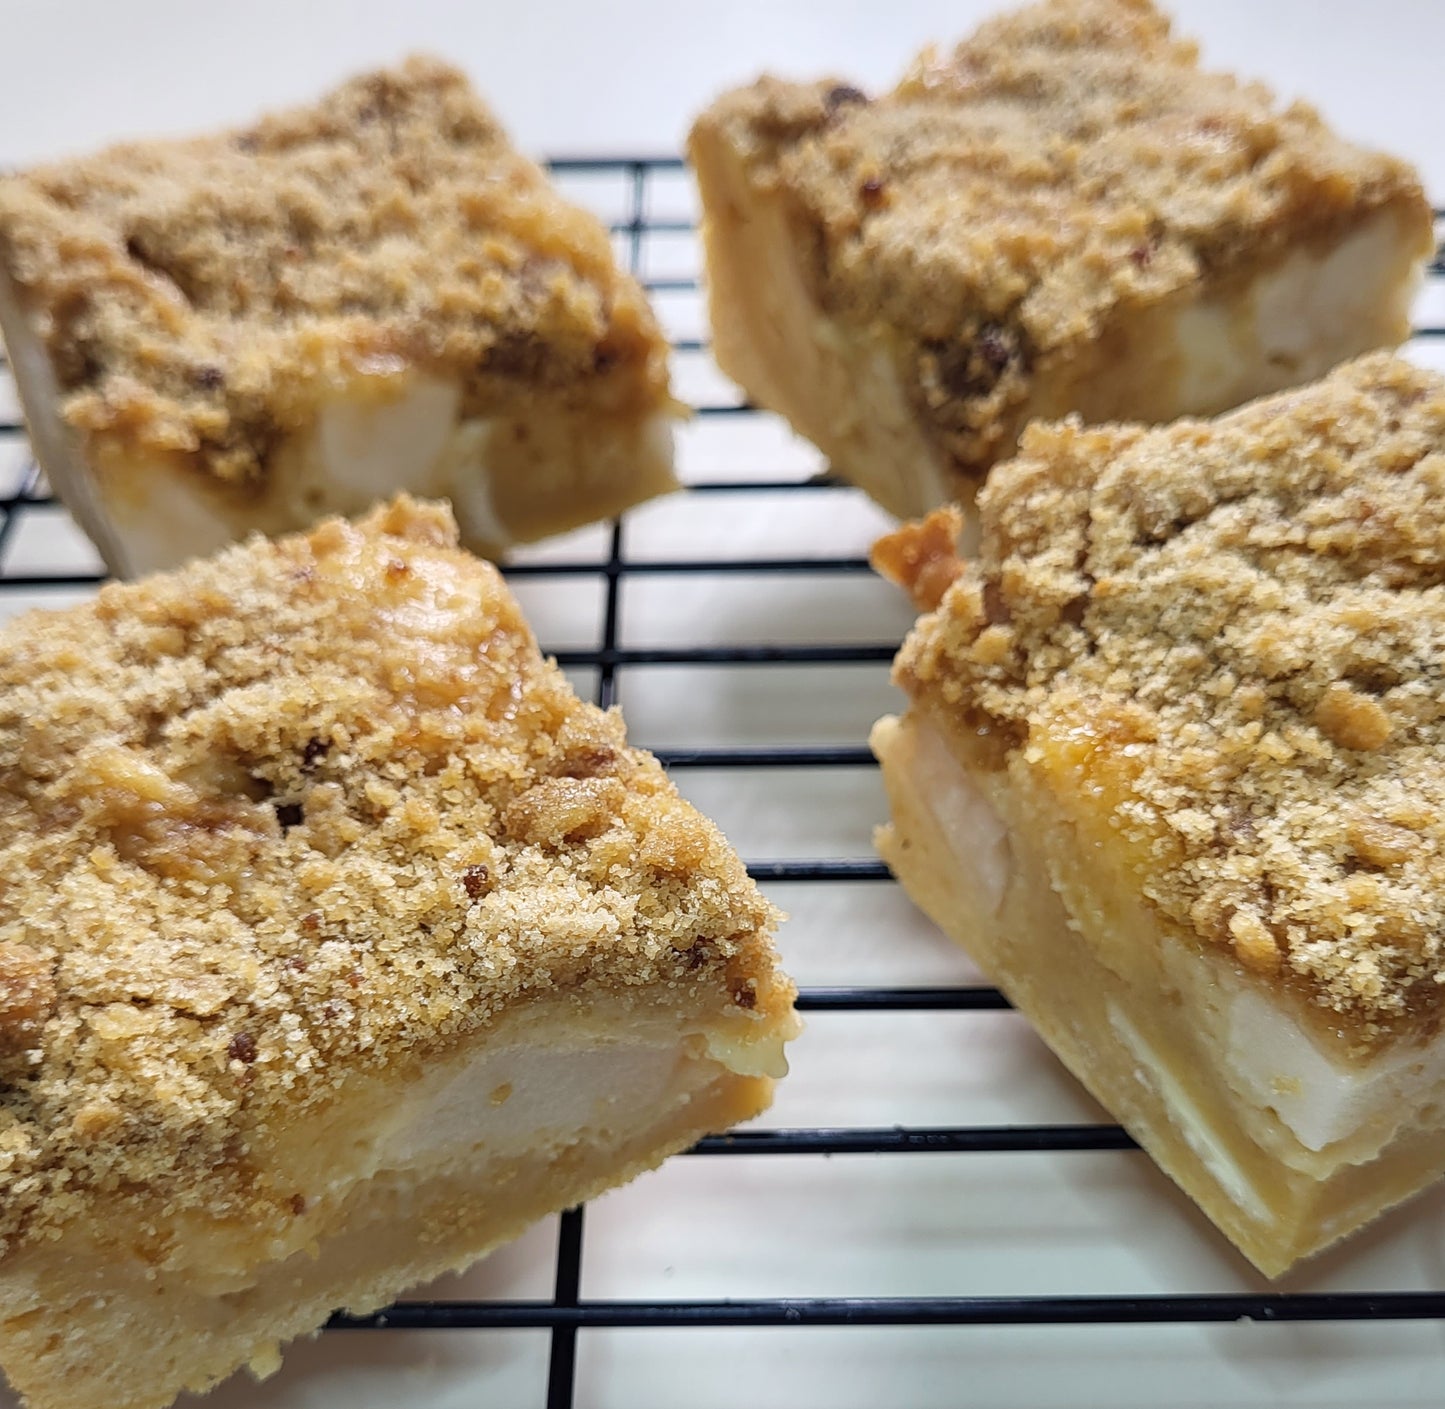 Apple and Caramel Crumble Blondie